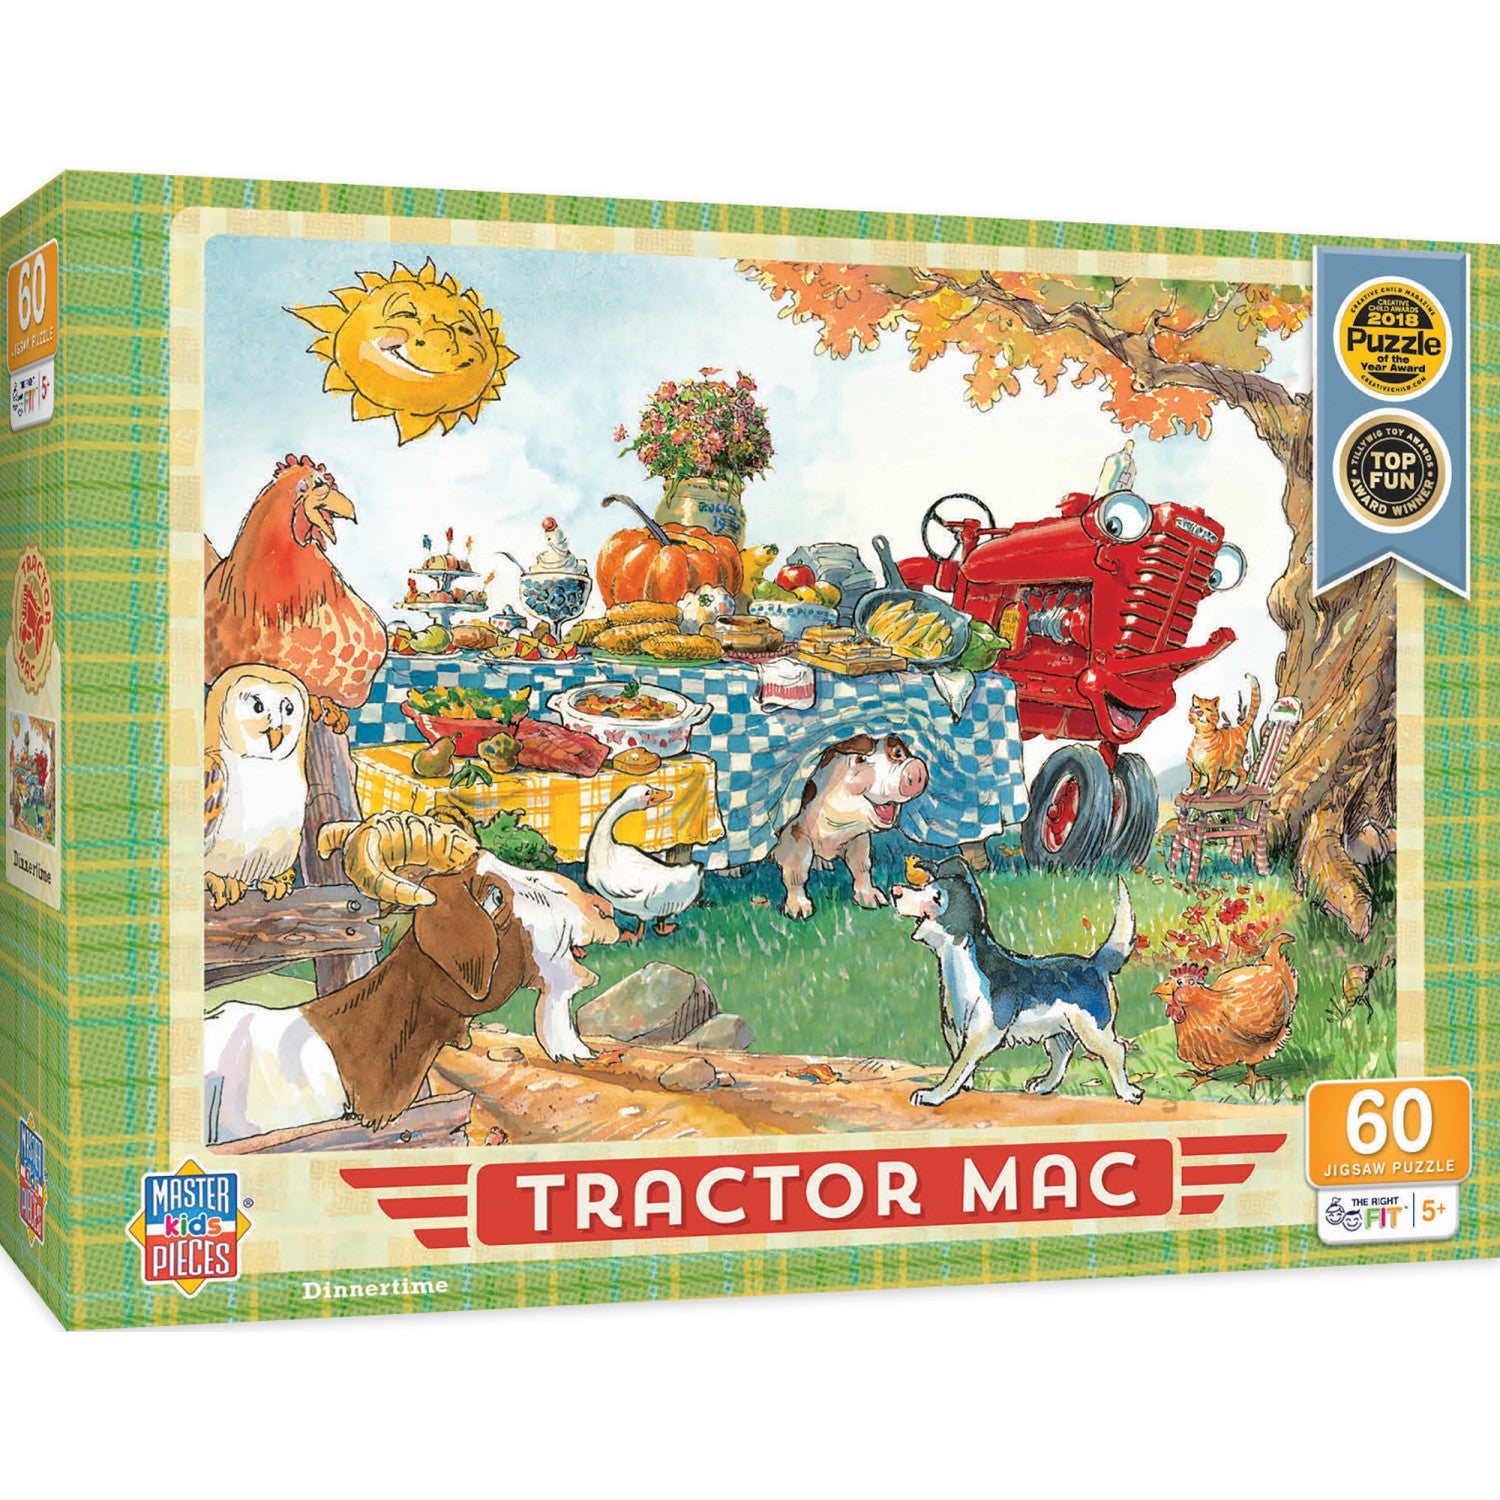 Tractor Mac - Dinner Time 60 Piece Kids Puzzle